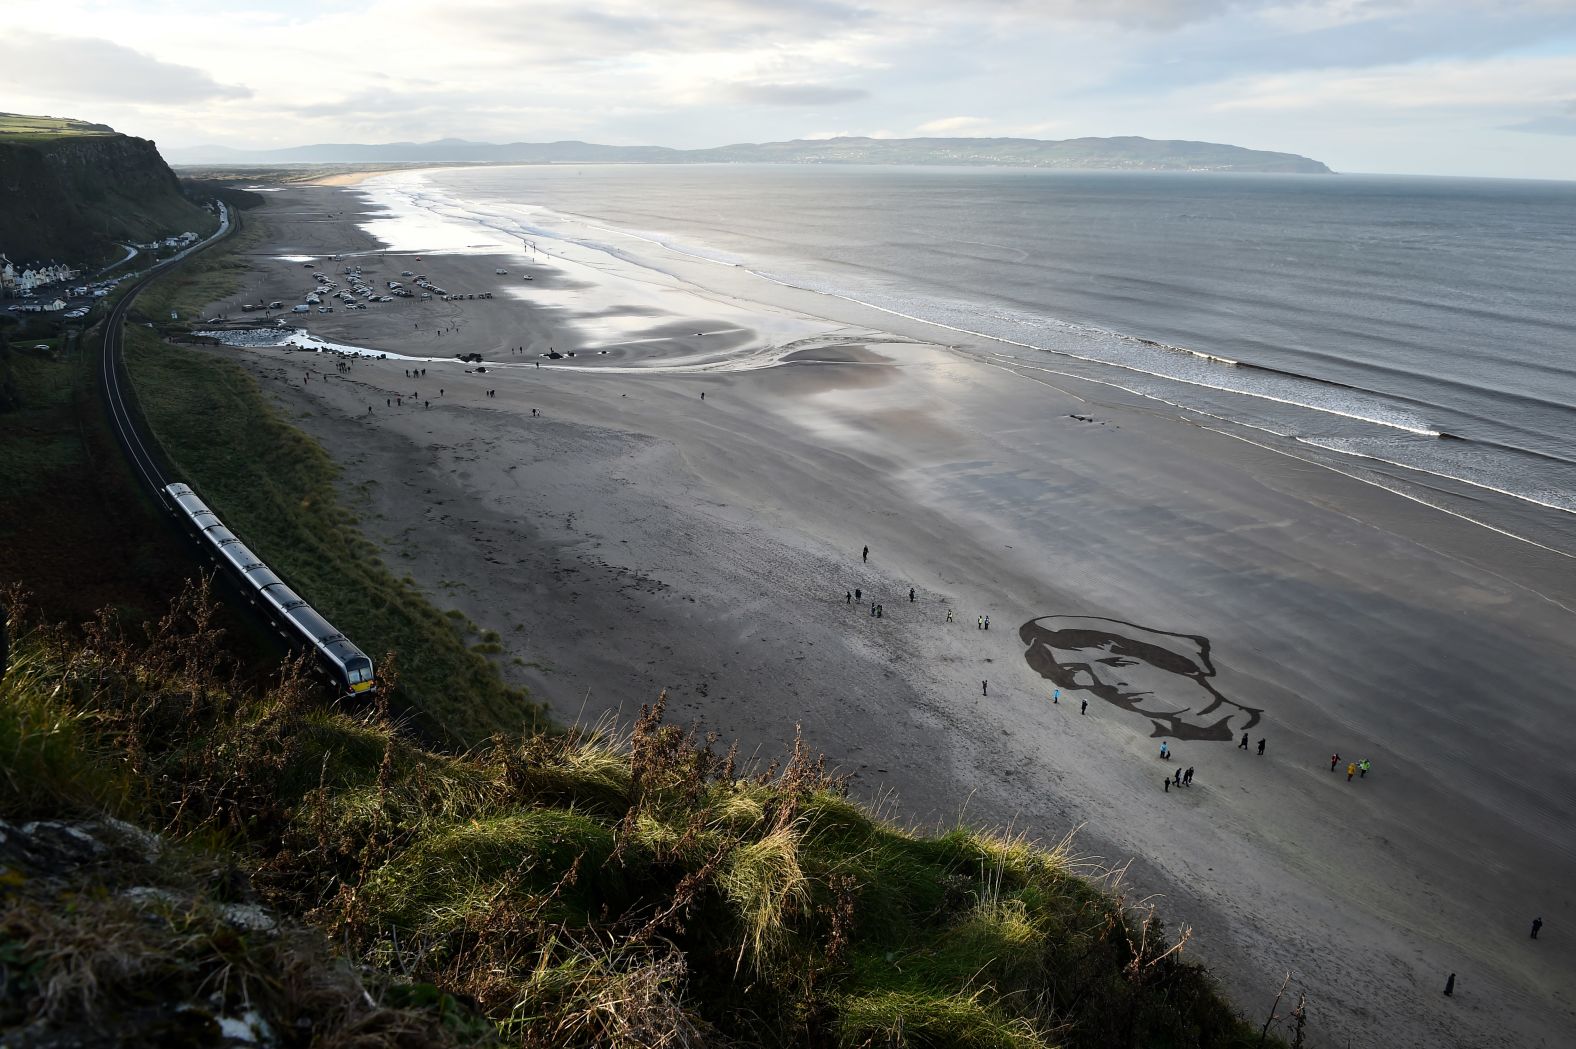 Members of the public gather Sunday around a portrait drawn in the sand of British Army Staff Nurse Rachel Ferguson on Downhill beach as part of the "Pages of the Sea" public art project curated by filmmaker Danny Boyle.